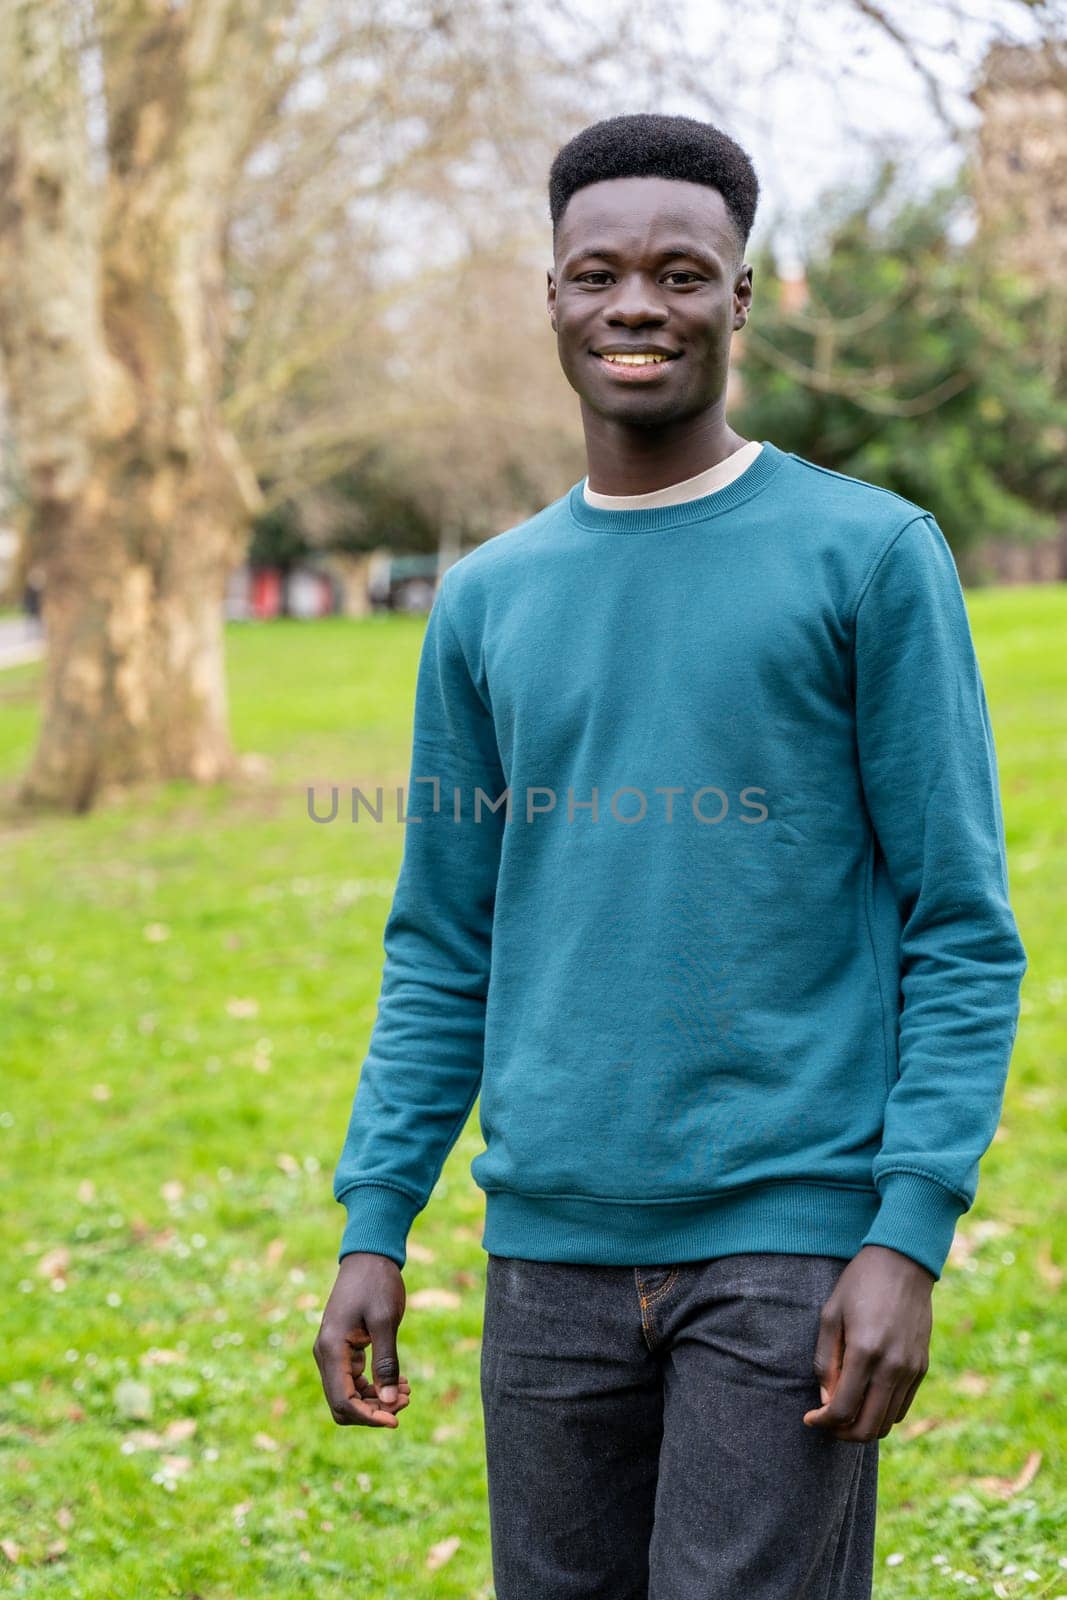 A young man wearing a blue sweater stands in a grassy field by Ceballos